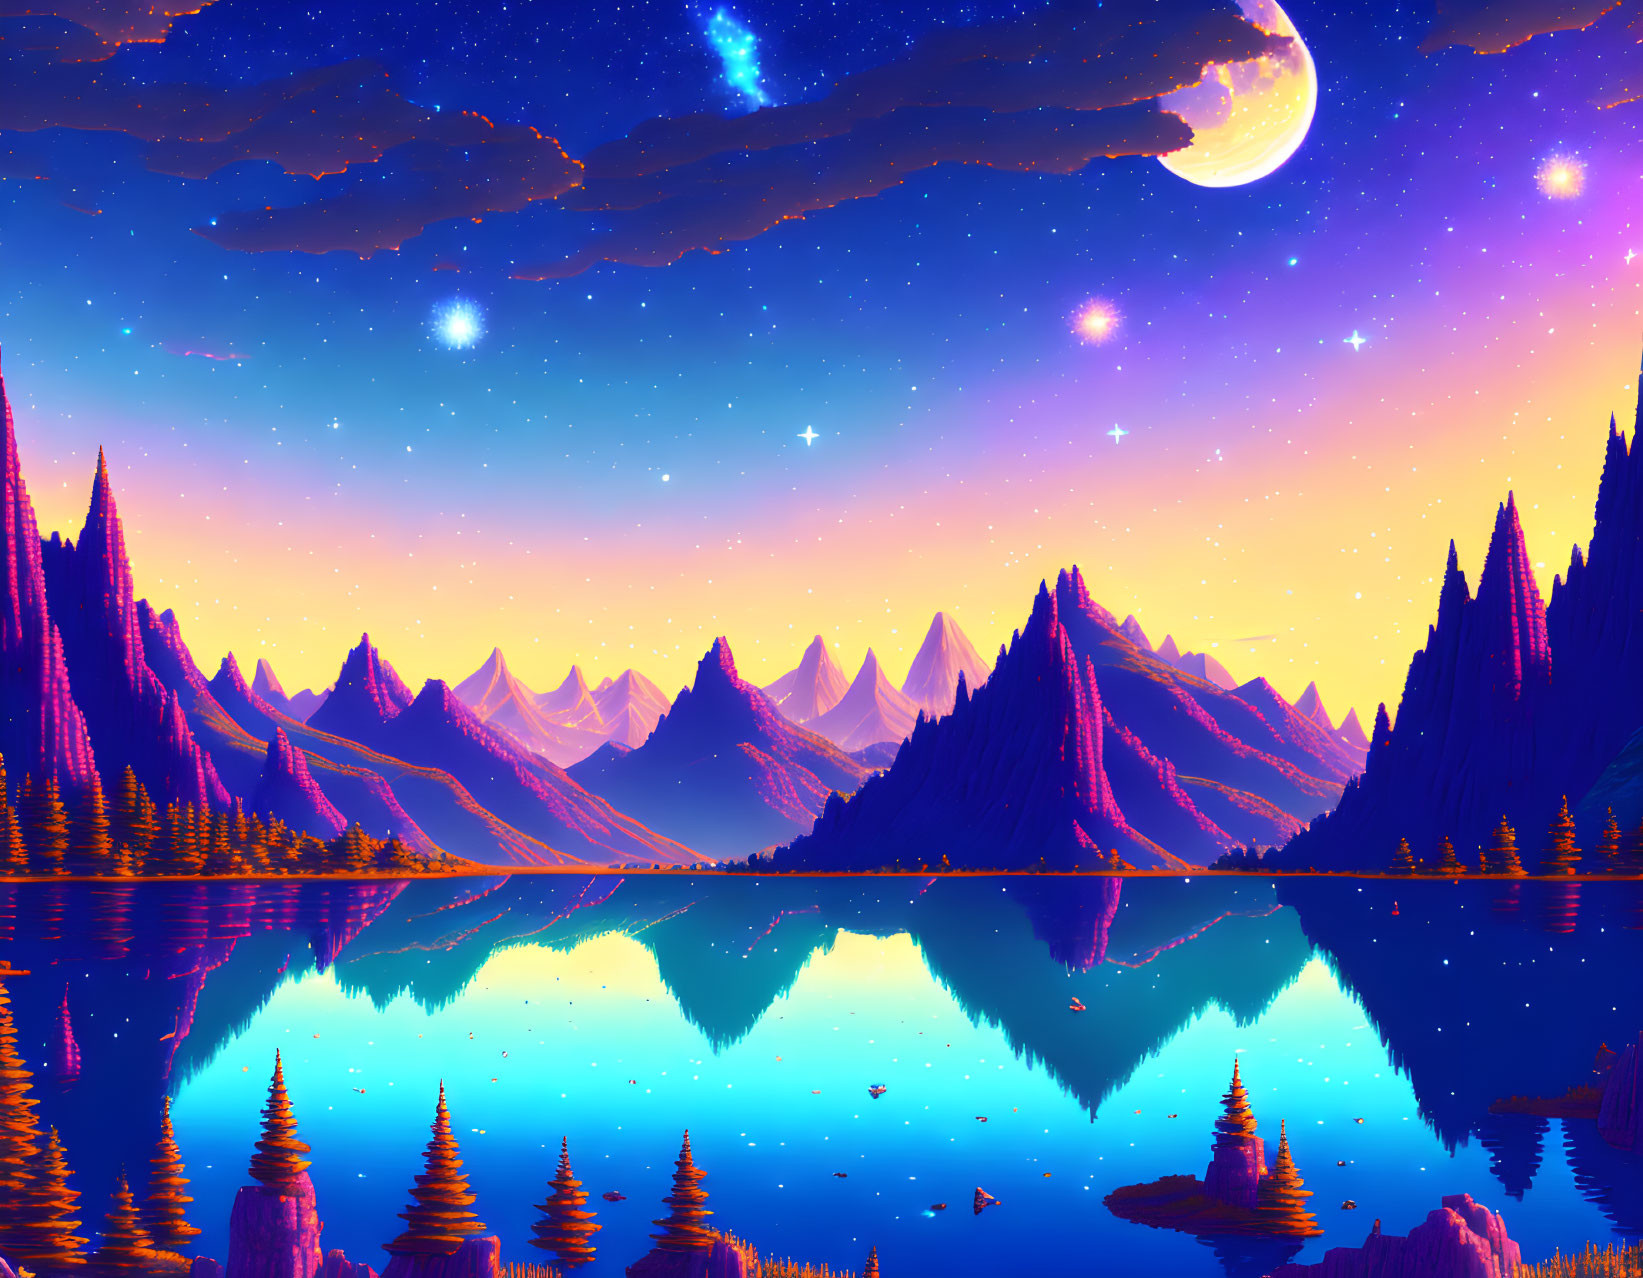 Vibrant digital artwork: Mountain landscape at night with crescent moon